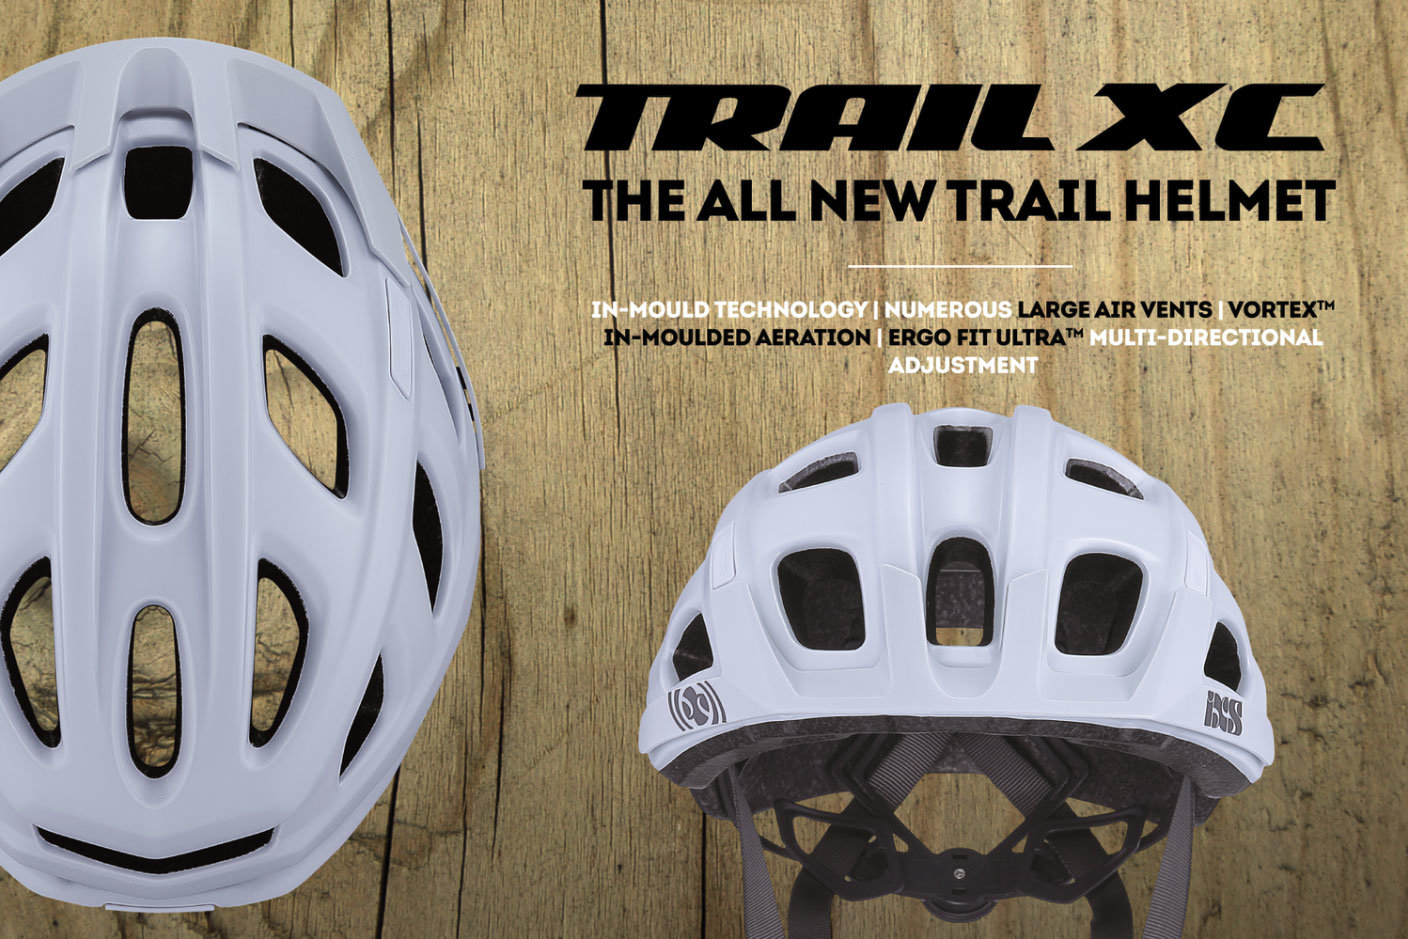 The all new trail XC helmet from iXS